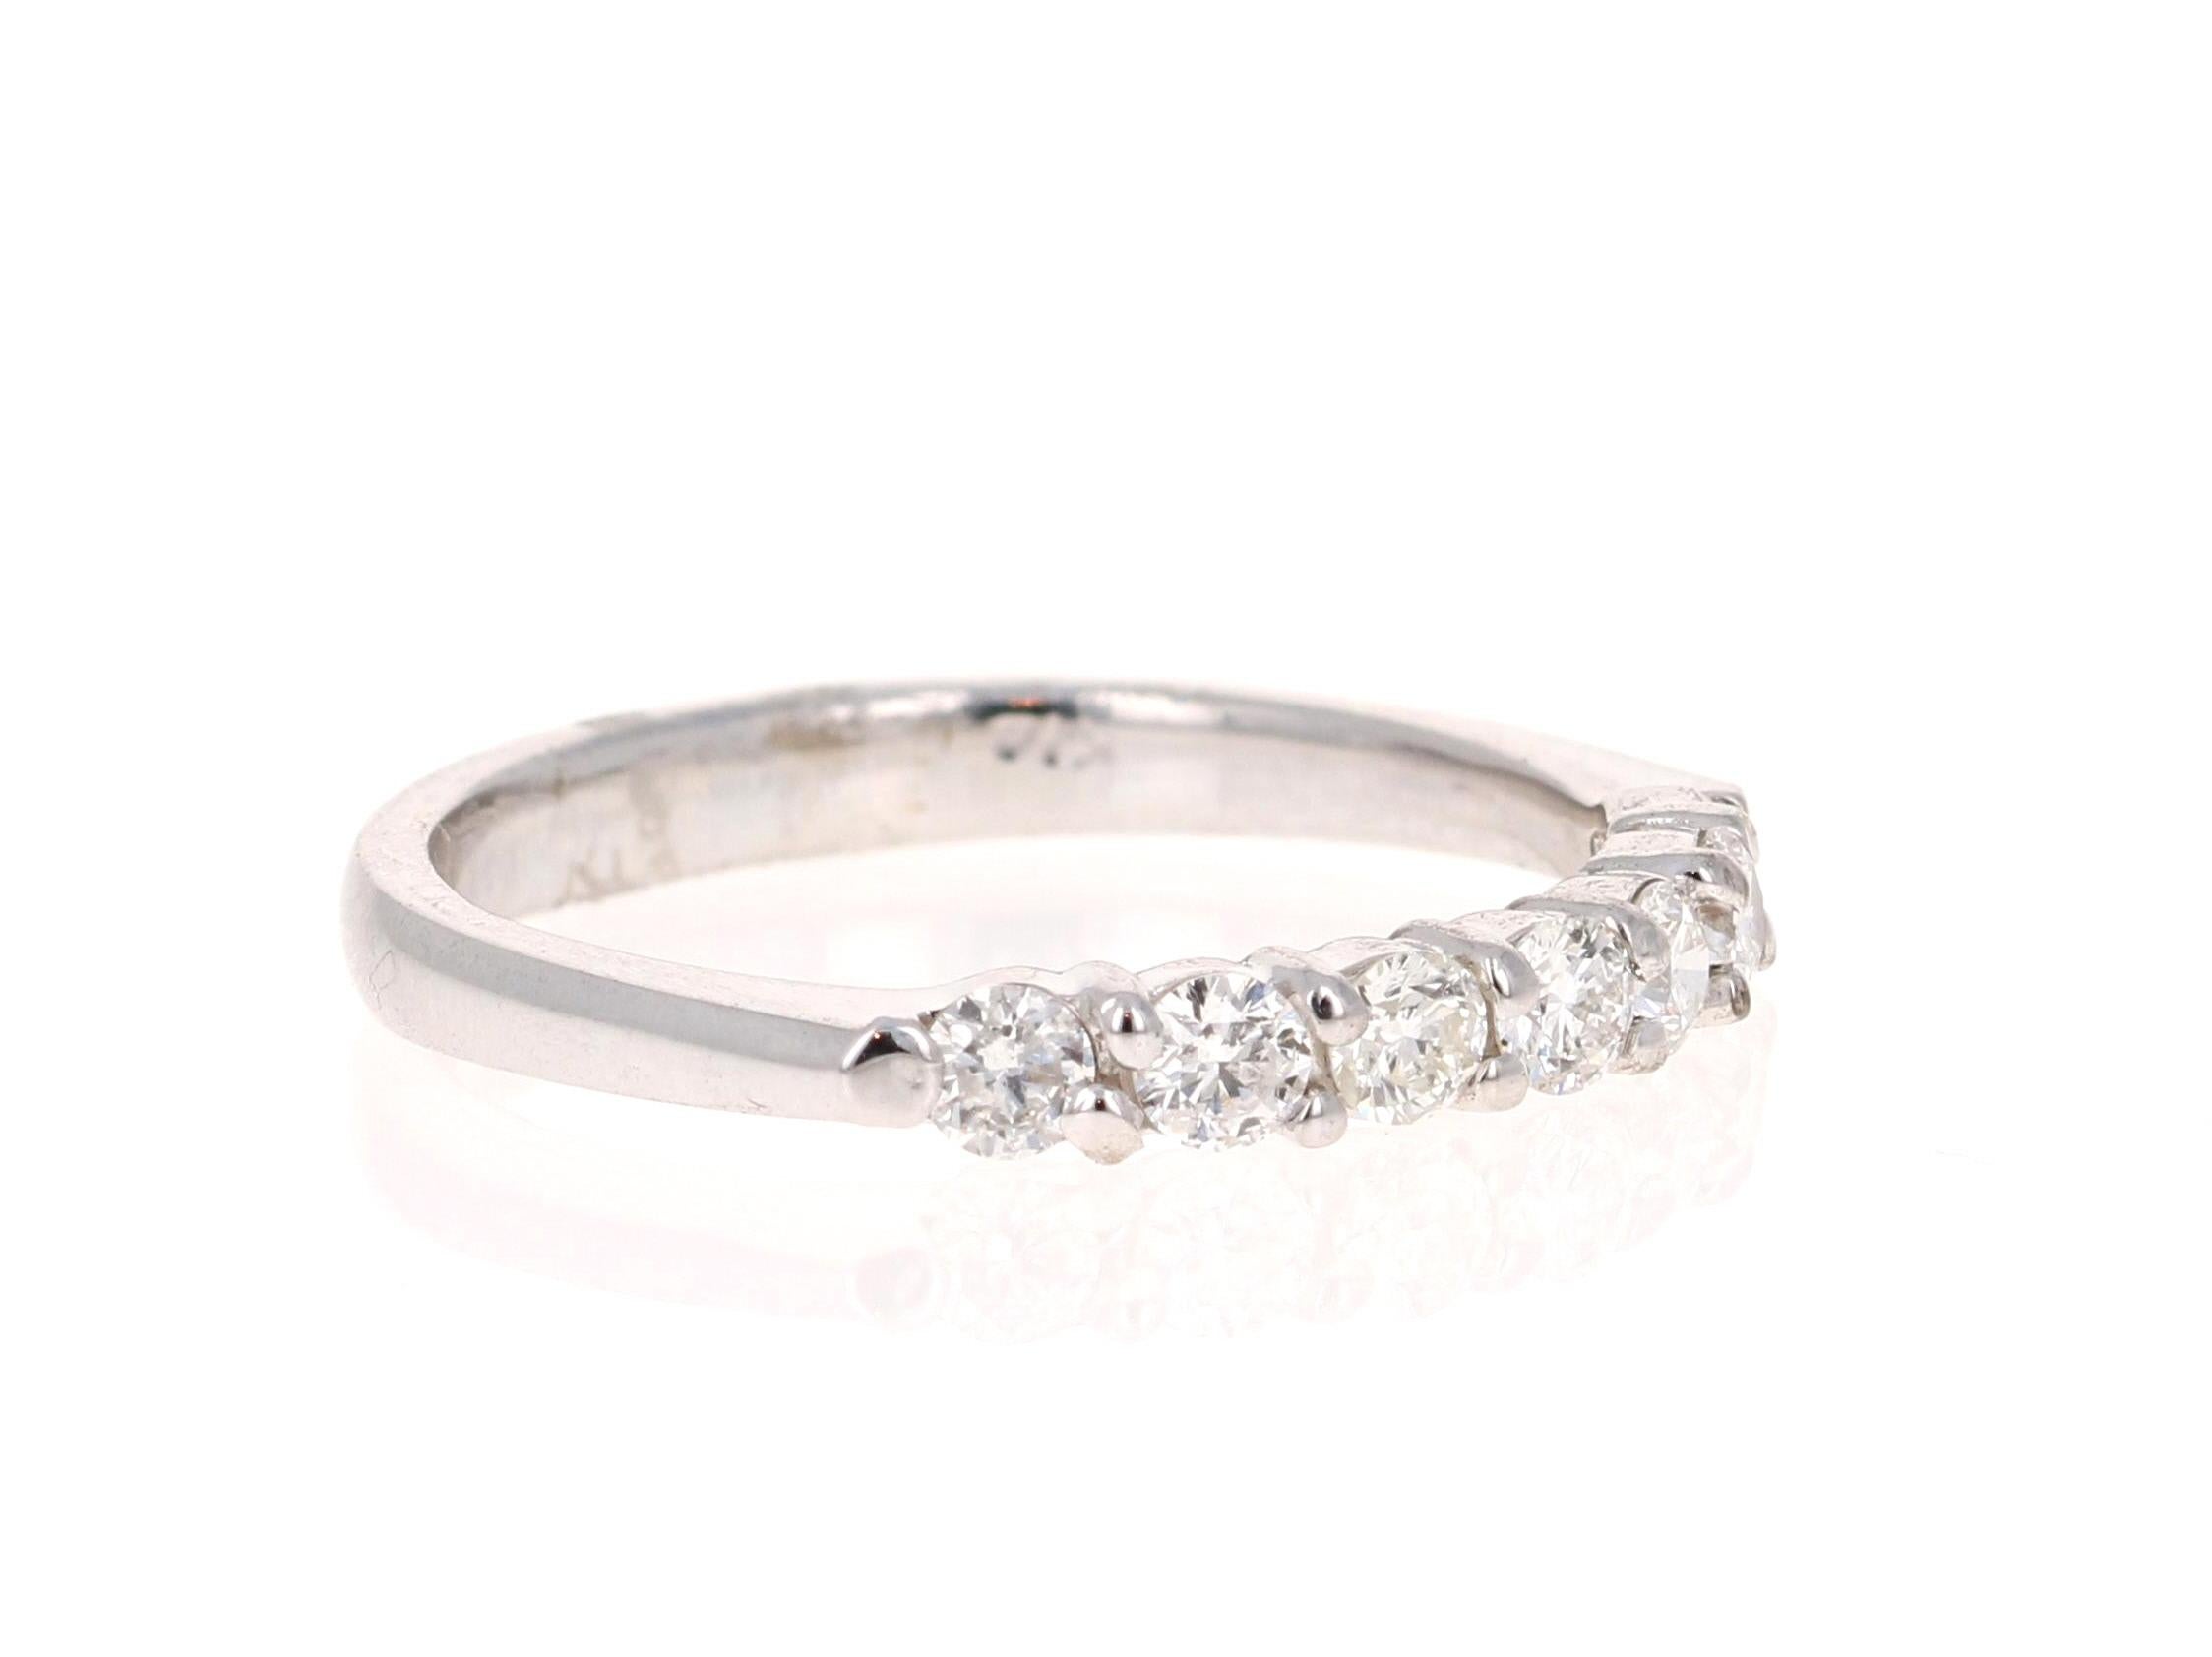 A beautiful band that can be worn as a single band or stack with other bands in other colors of Gold! 

This ring has 7 Round Cut Diamonds that weigh 0.49 Carats. The clarity and color of the diamonds are SI-F.

Crafted in 14 Karat White Gold and is